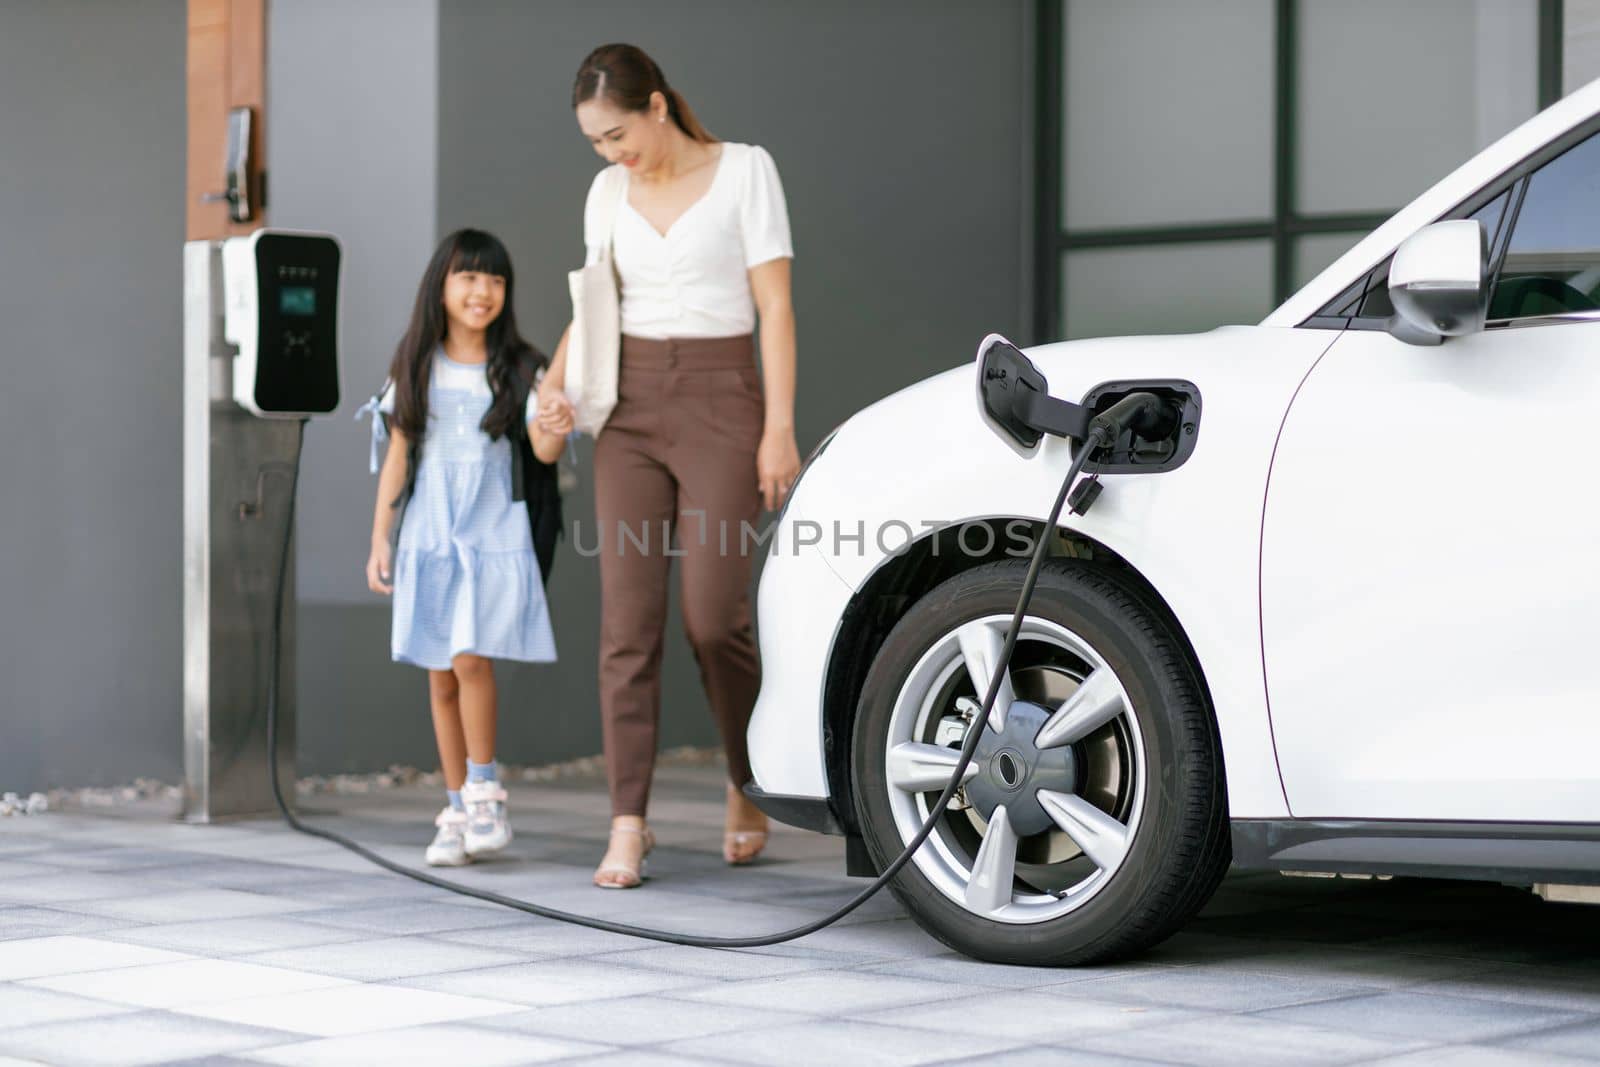 Focus progressive EV car at home with blur woman in background. by biancoblue